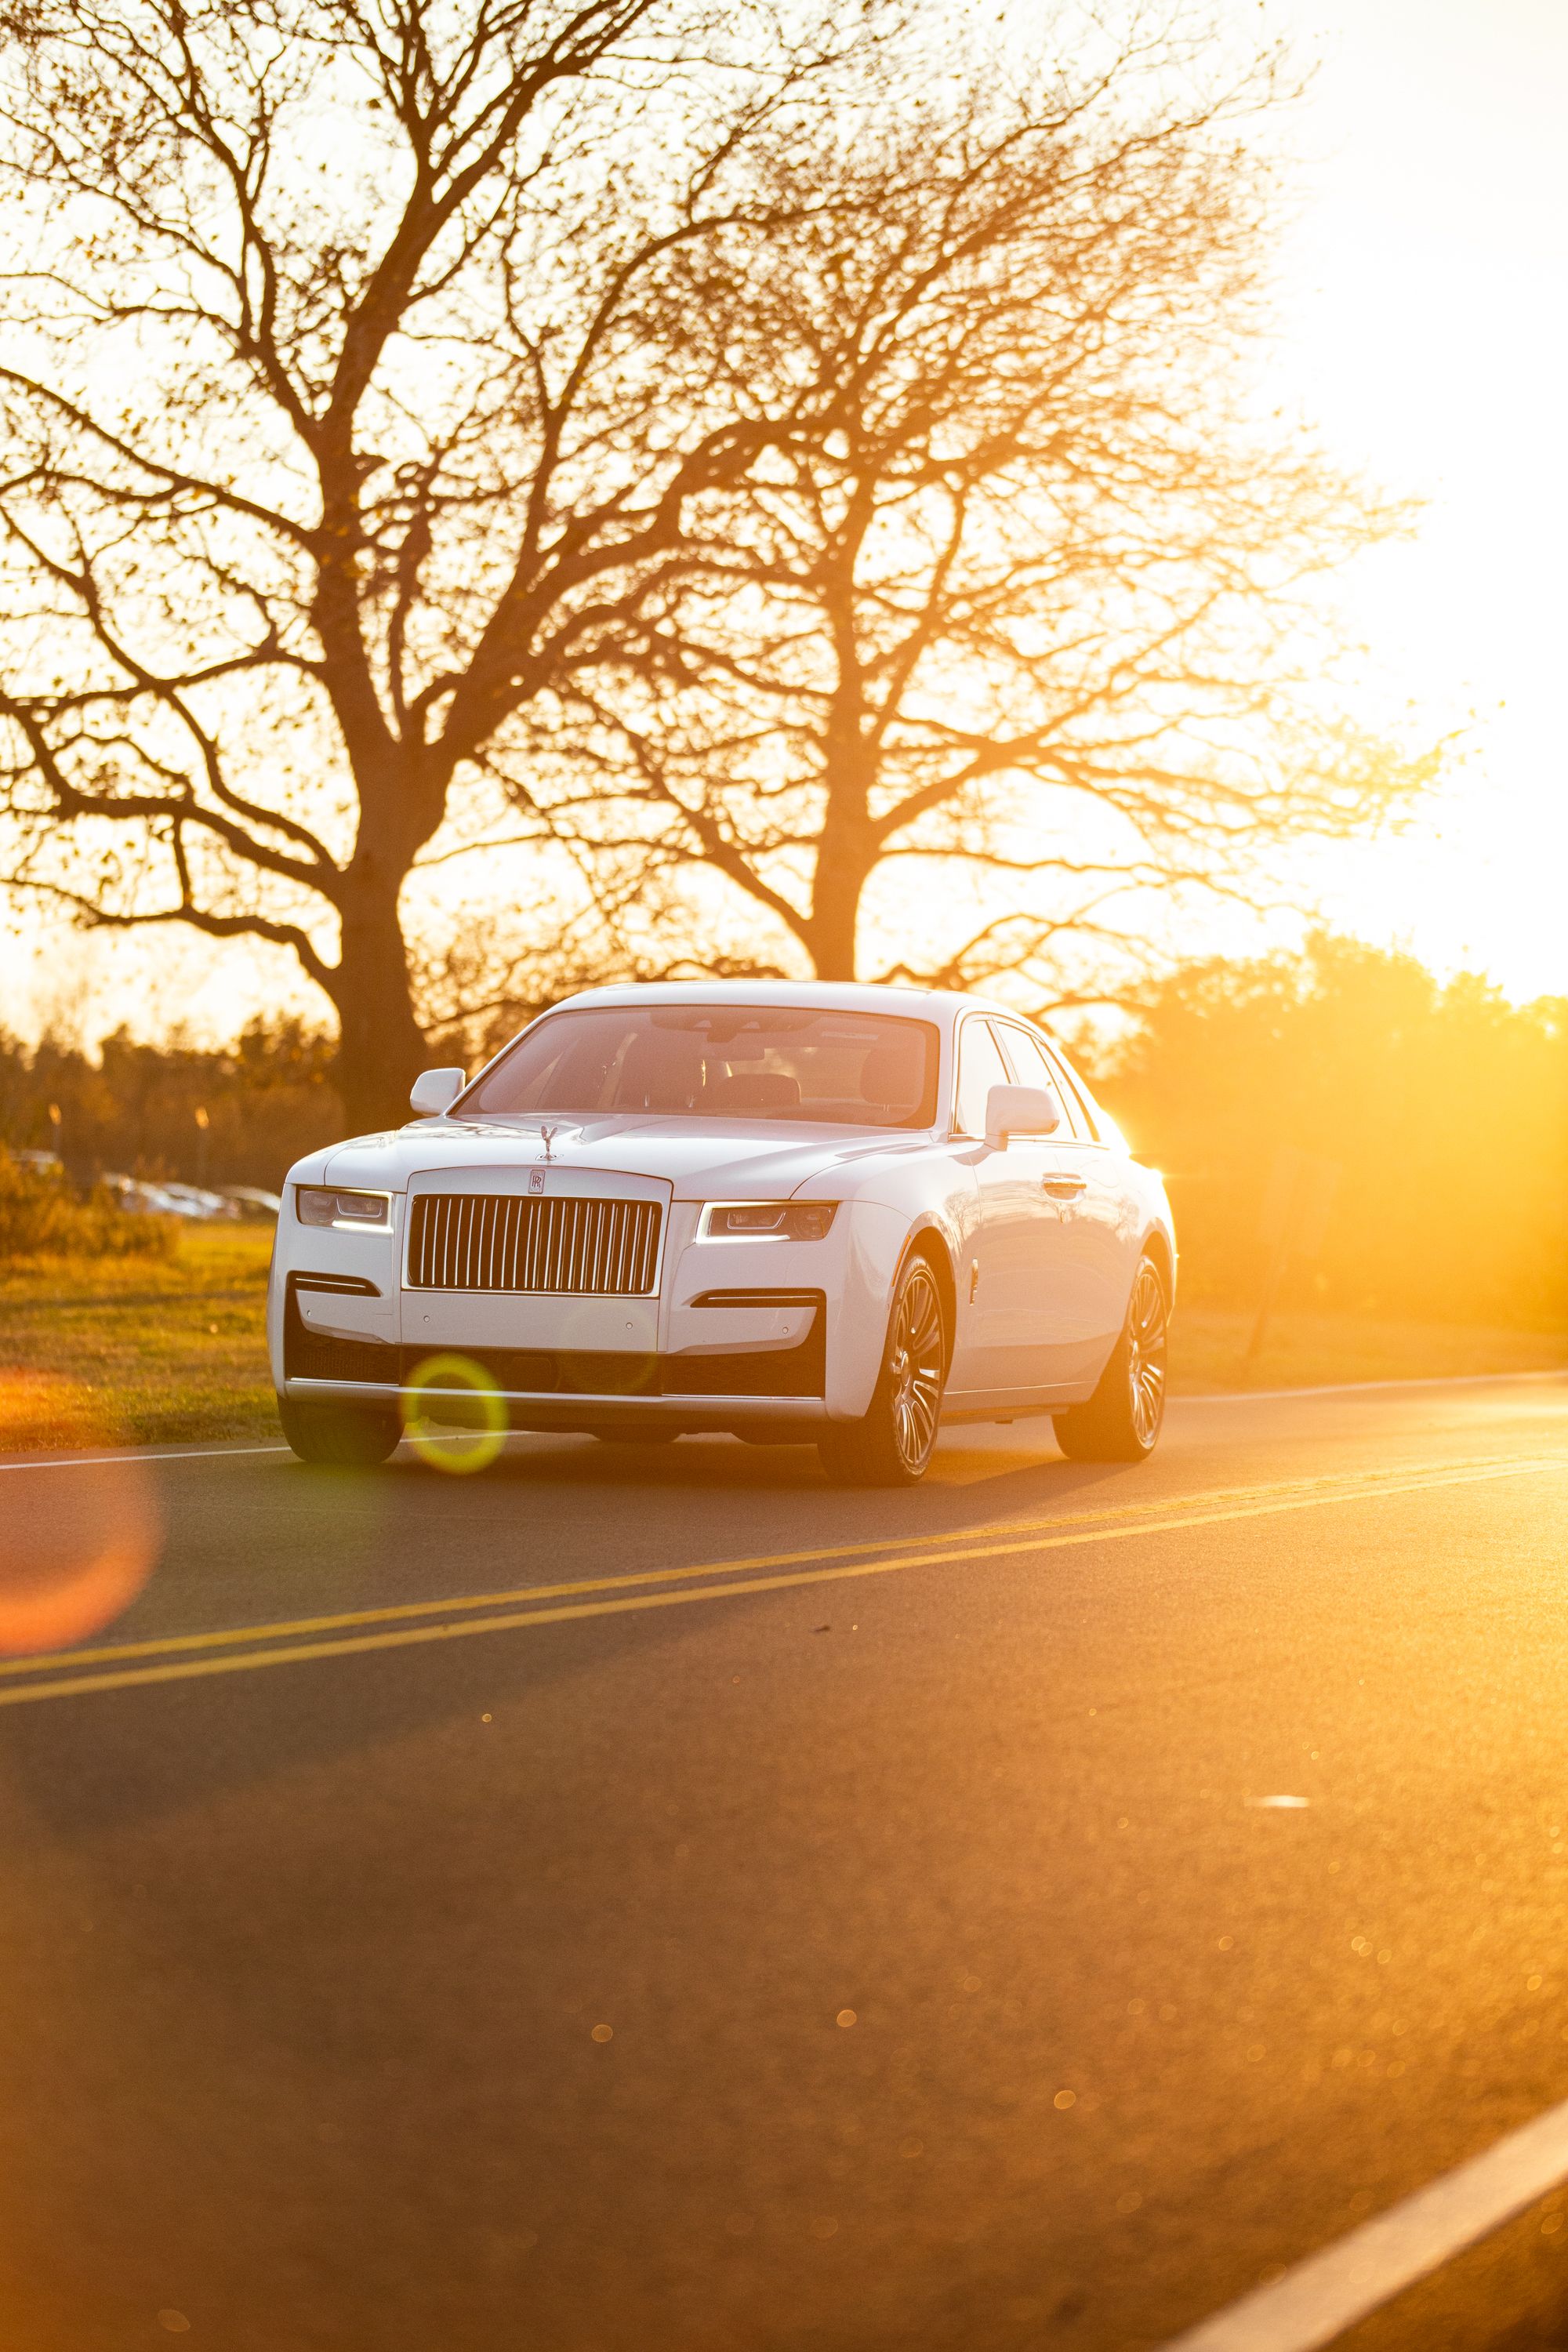 2021 Rolls-Royce Ghost Is as Peaceful as You Want It to Be